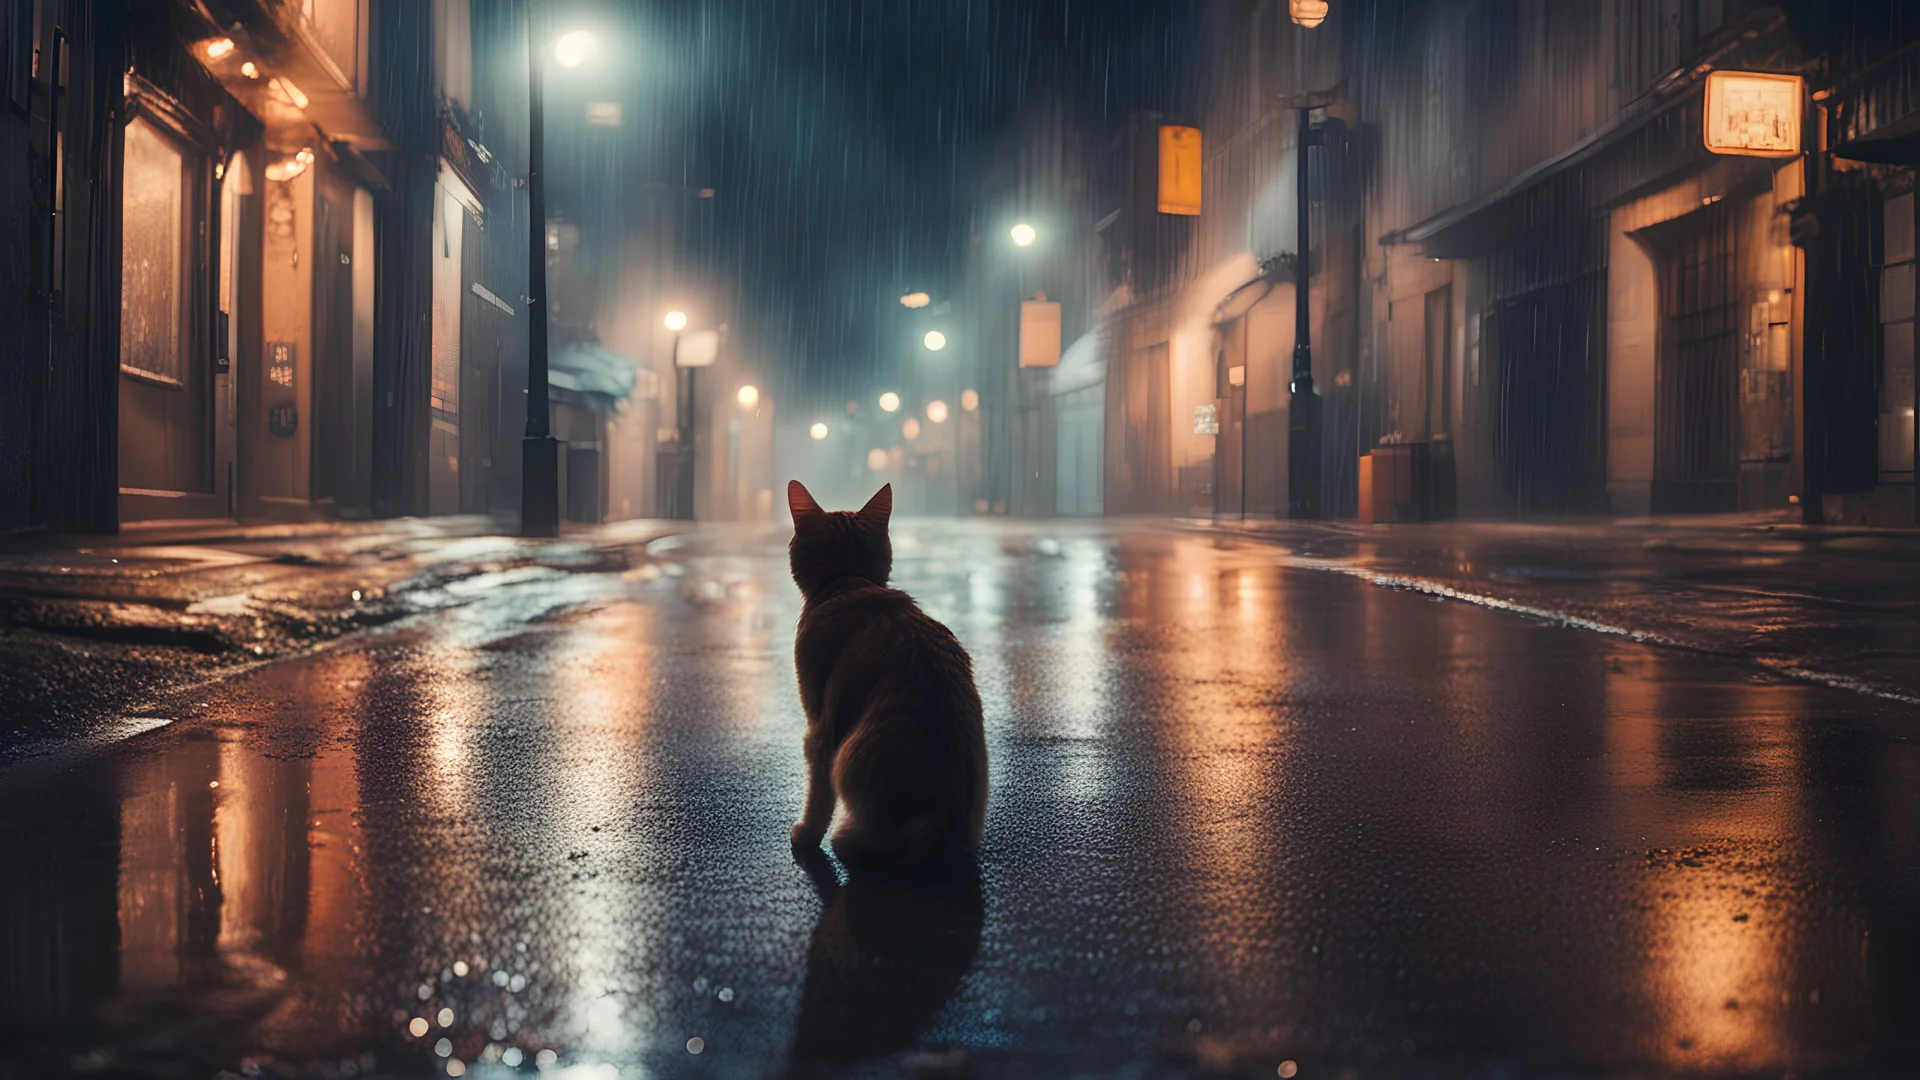 Night on a wet street of a city with lights, a cat far away stands on the pavement